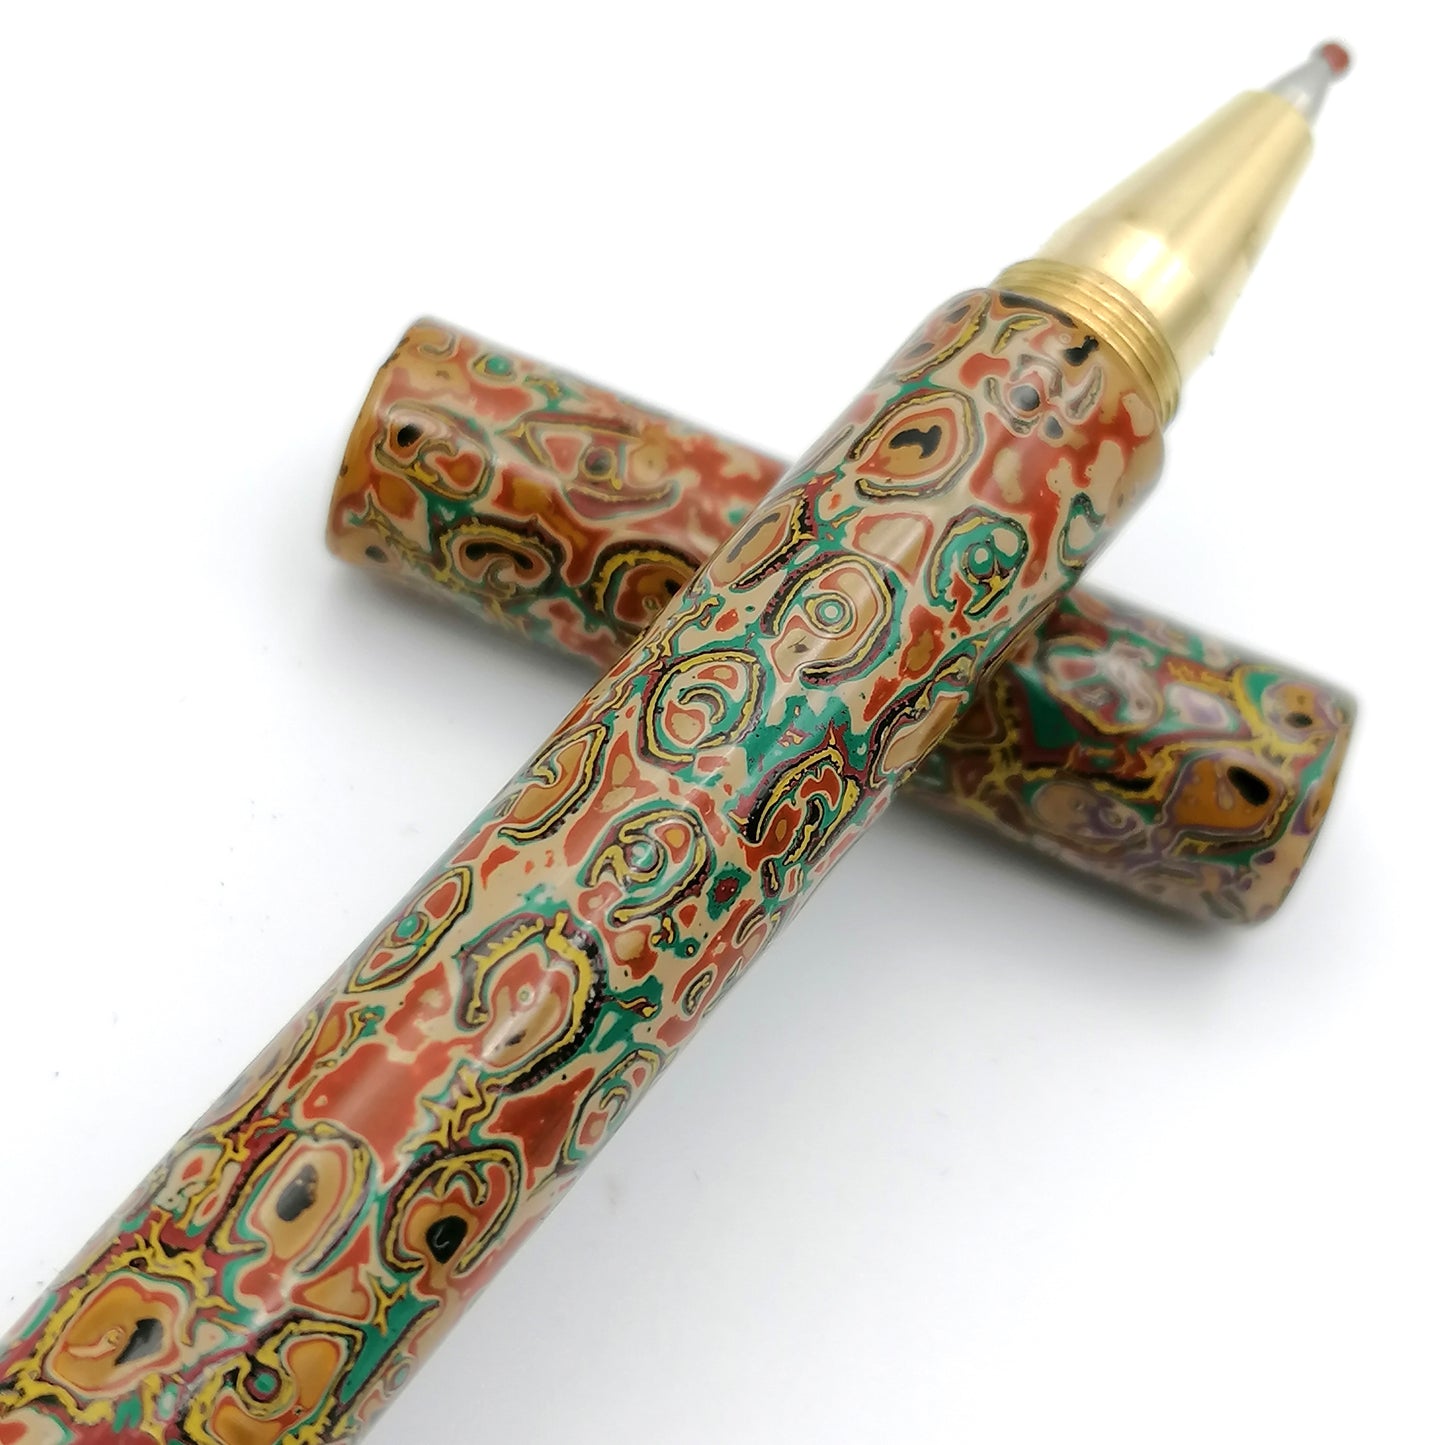 Tambo Solid Brass Pen in greens yellows and oranges